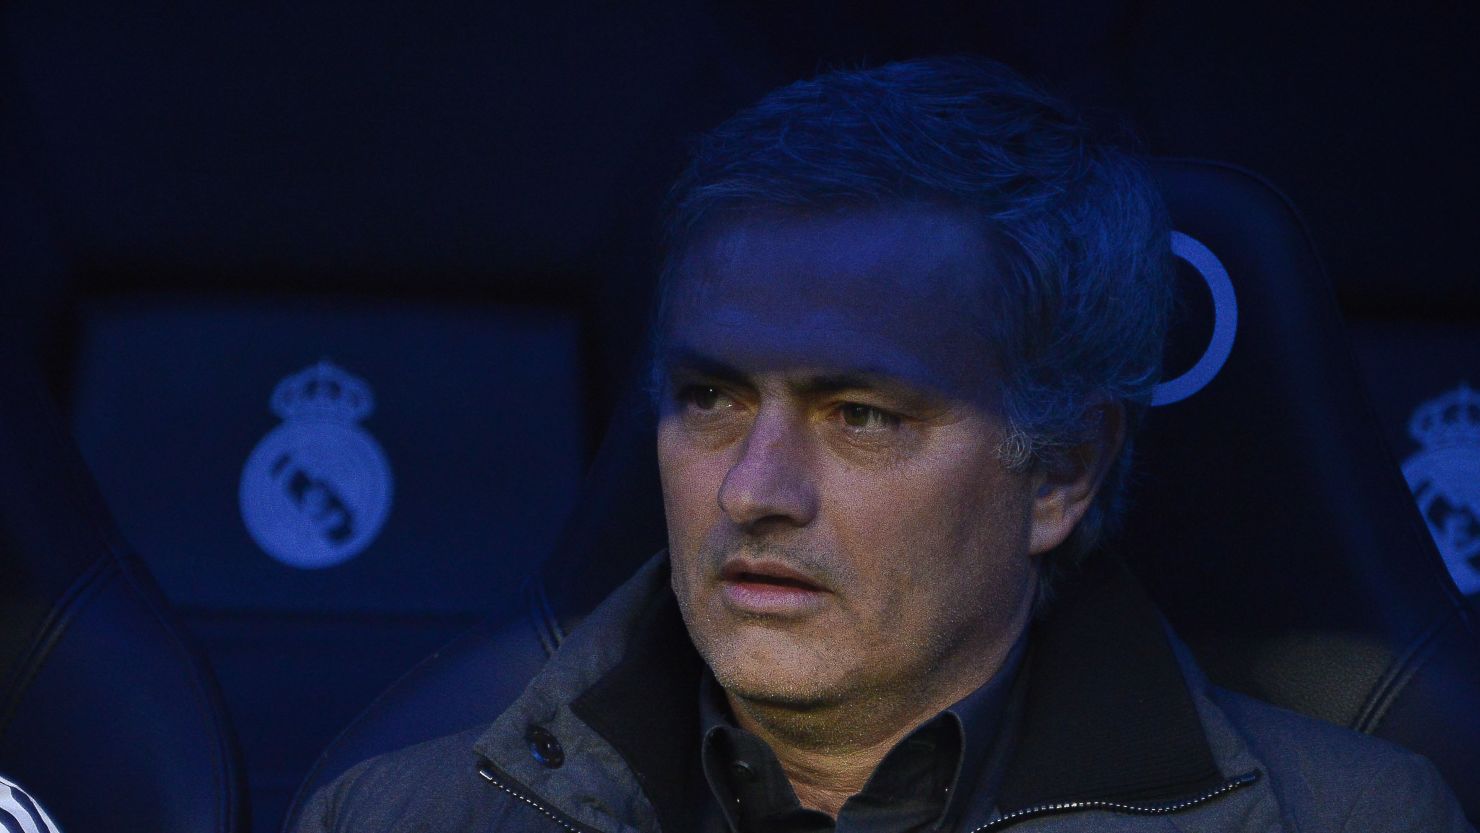 The storm clouds continue to gather over Real Madrid manager Jose Mourinho.